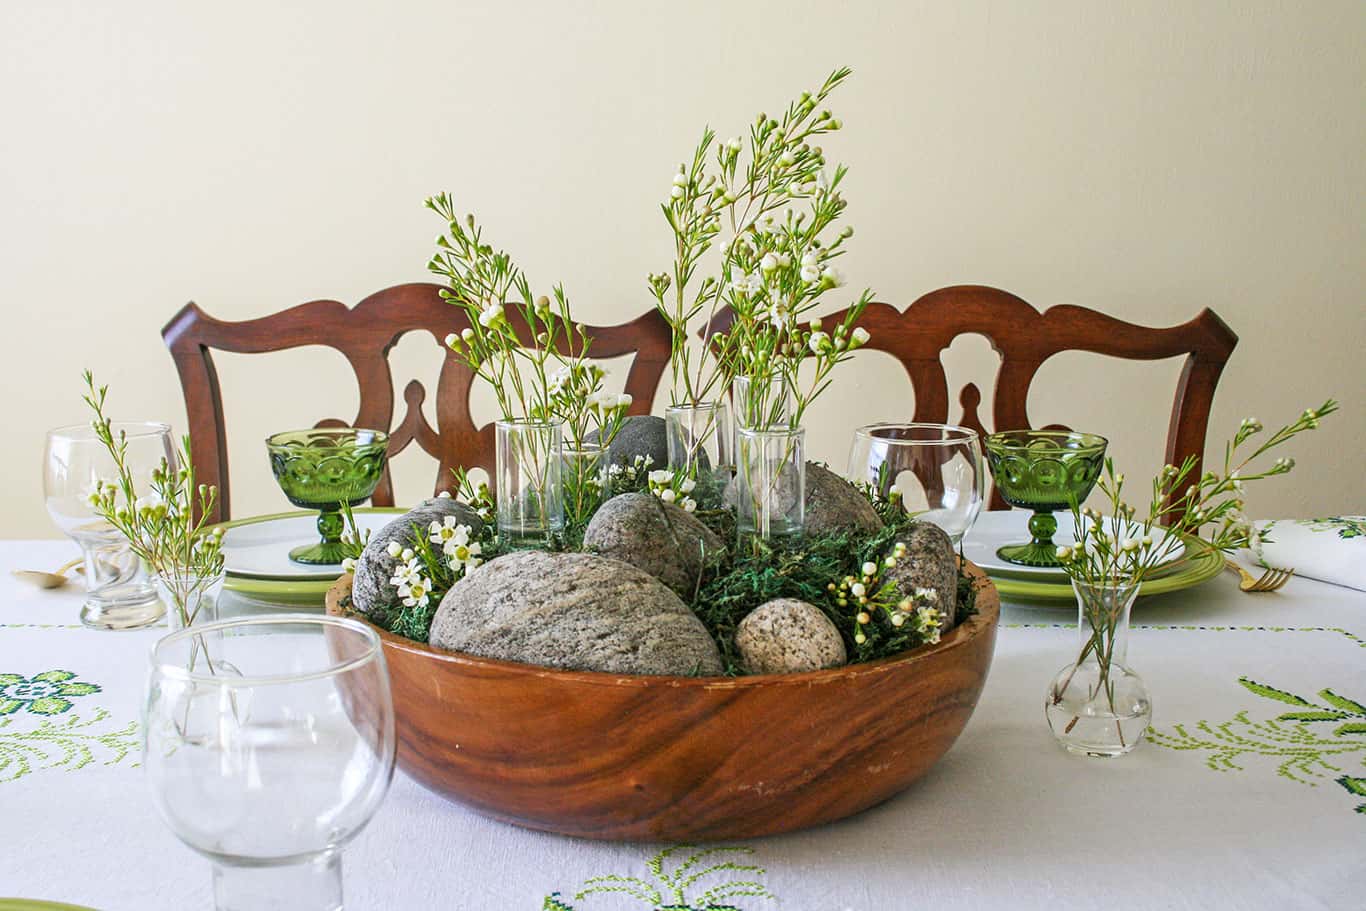 Simple moss bowl centerpiece diy on table